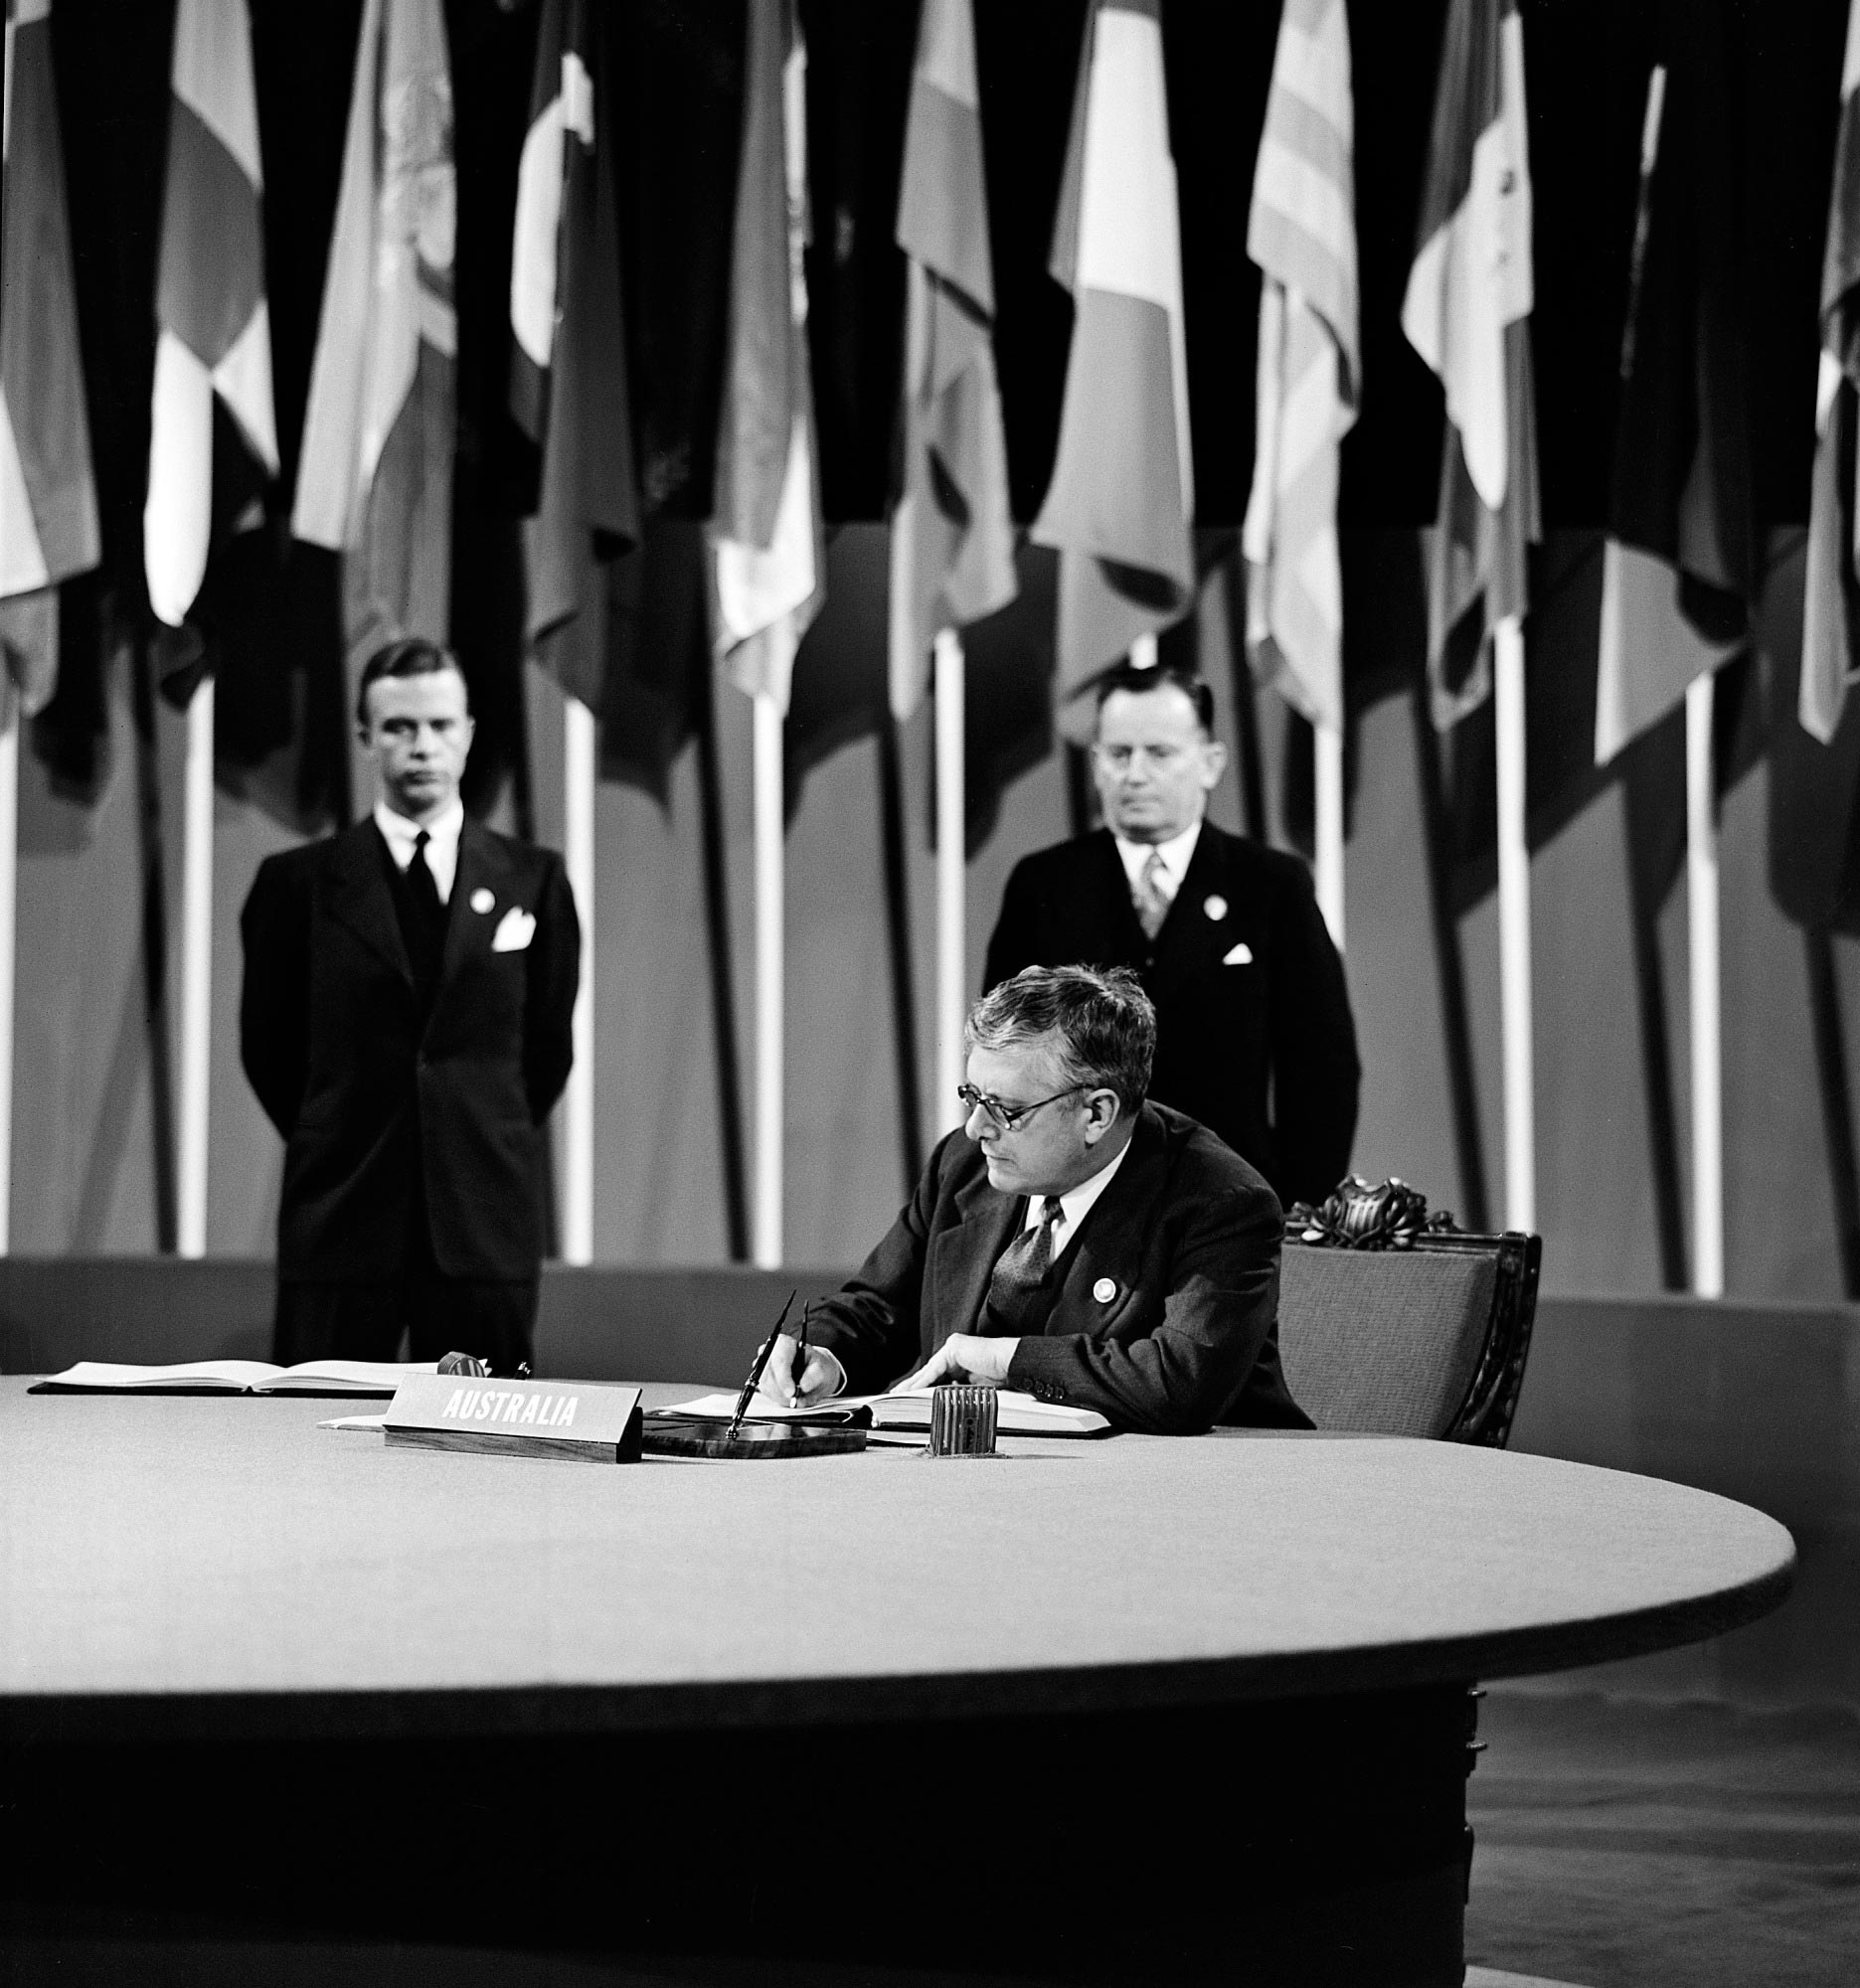 Australia signs the United Nations Charter. H.V. Evatt signing the UN Charter in San Francisco, 1945.